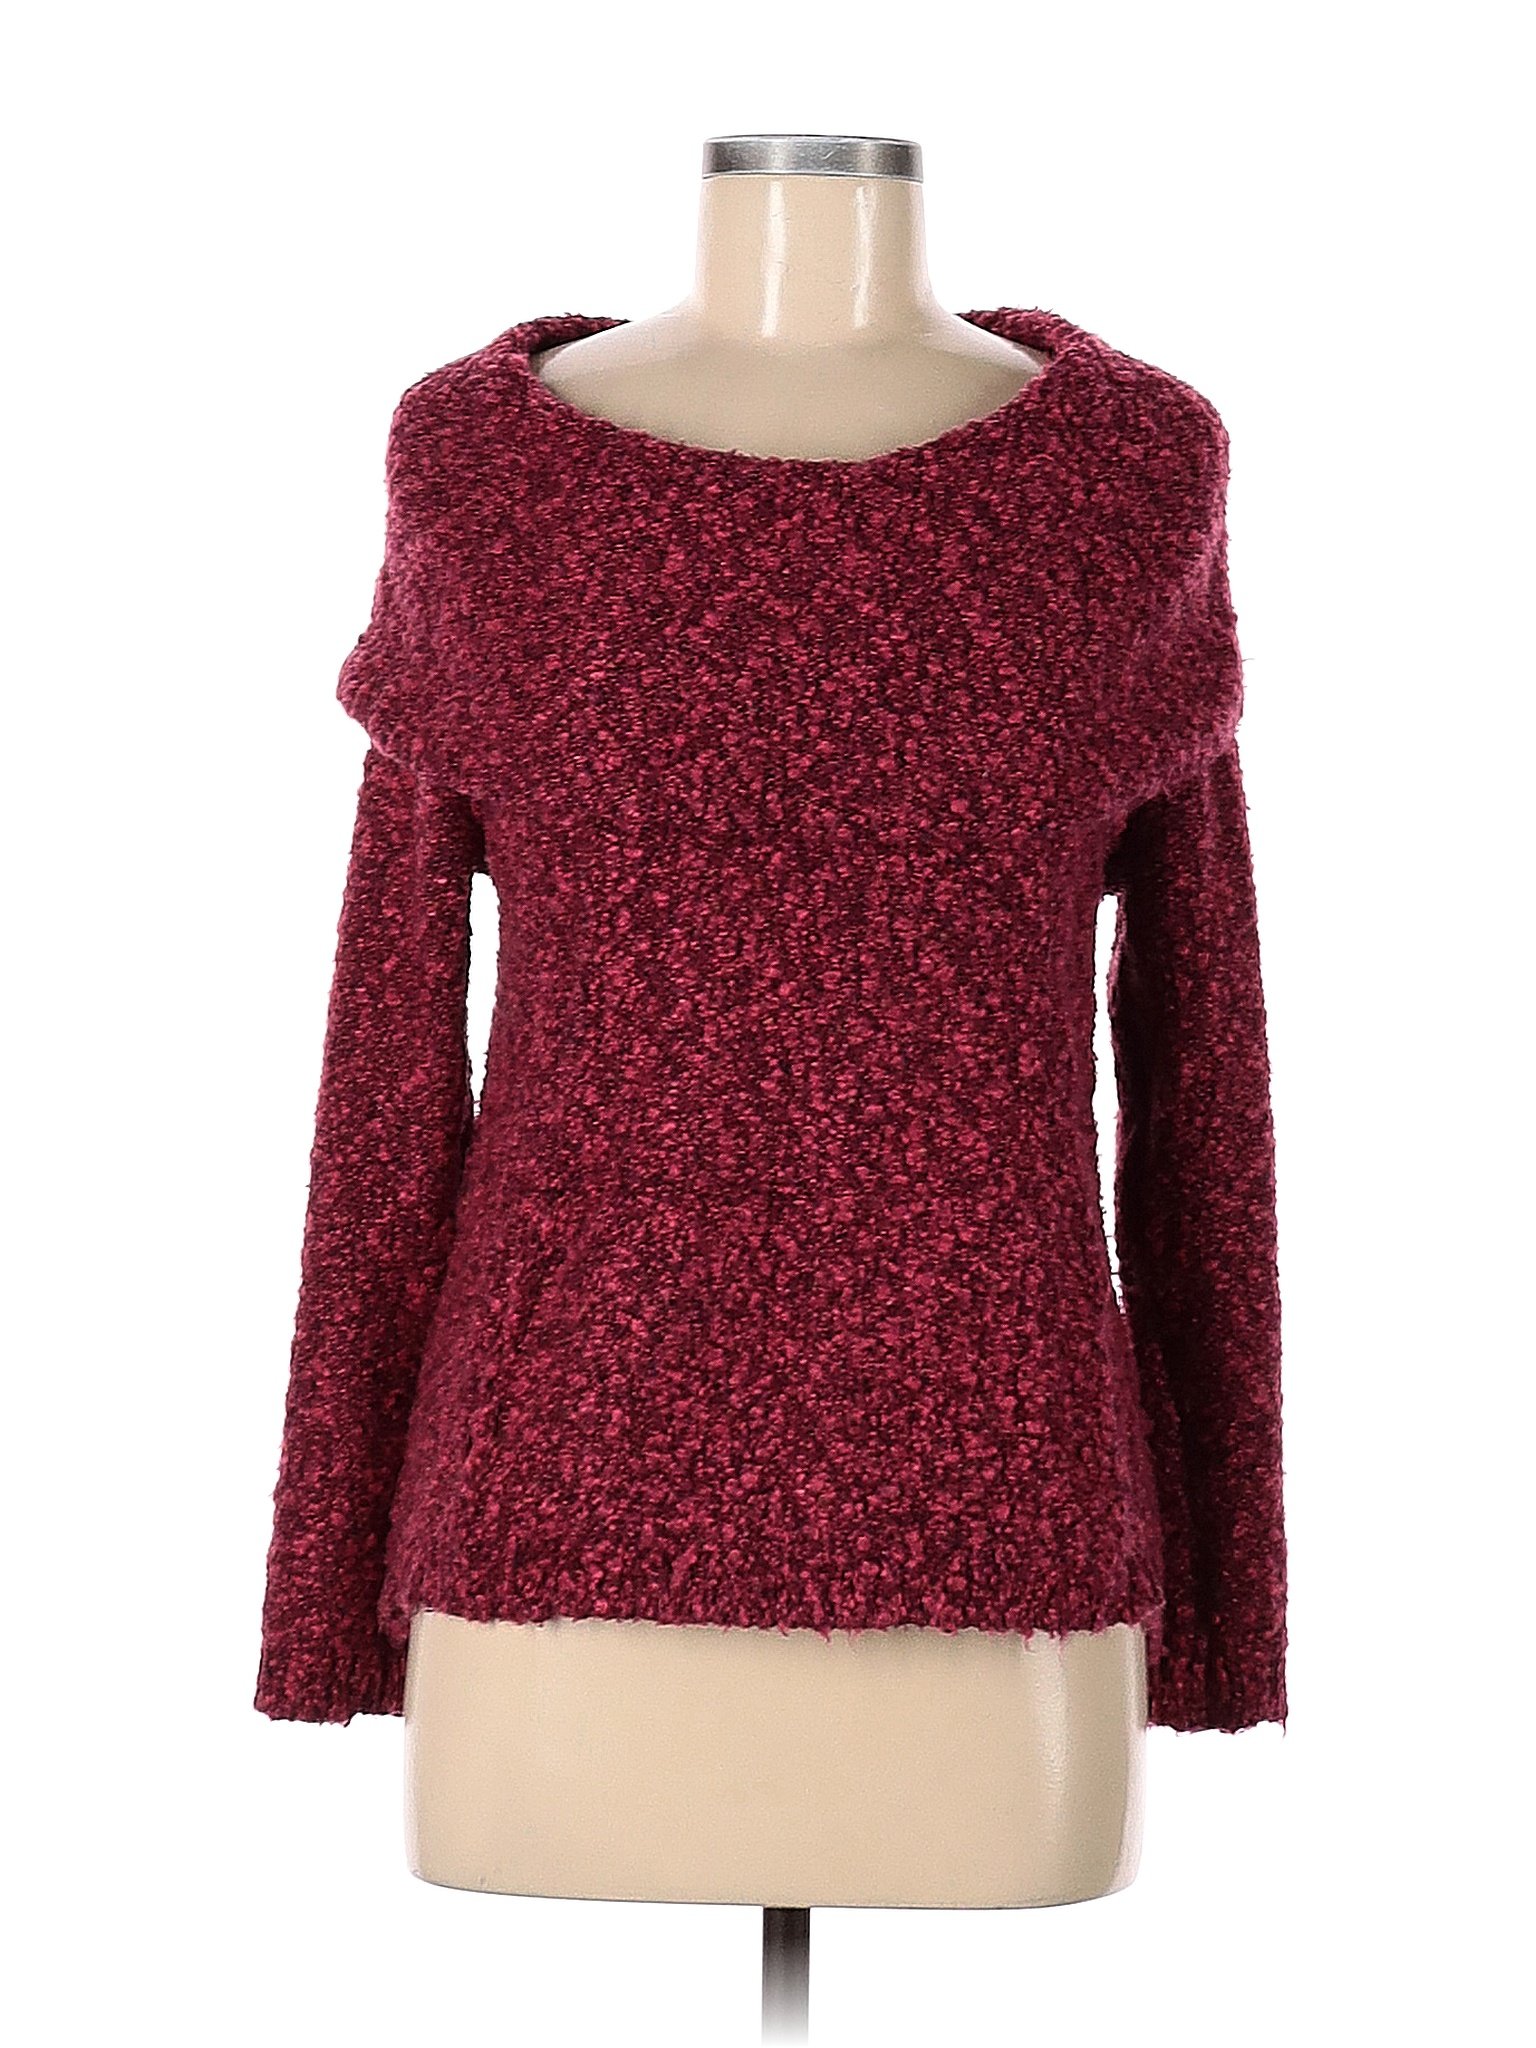 Peck & Peck Maroon Burgundy Pullover Sweater Size M - 74% off | thredUP